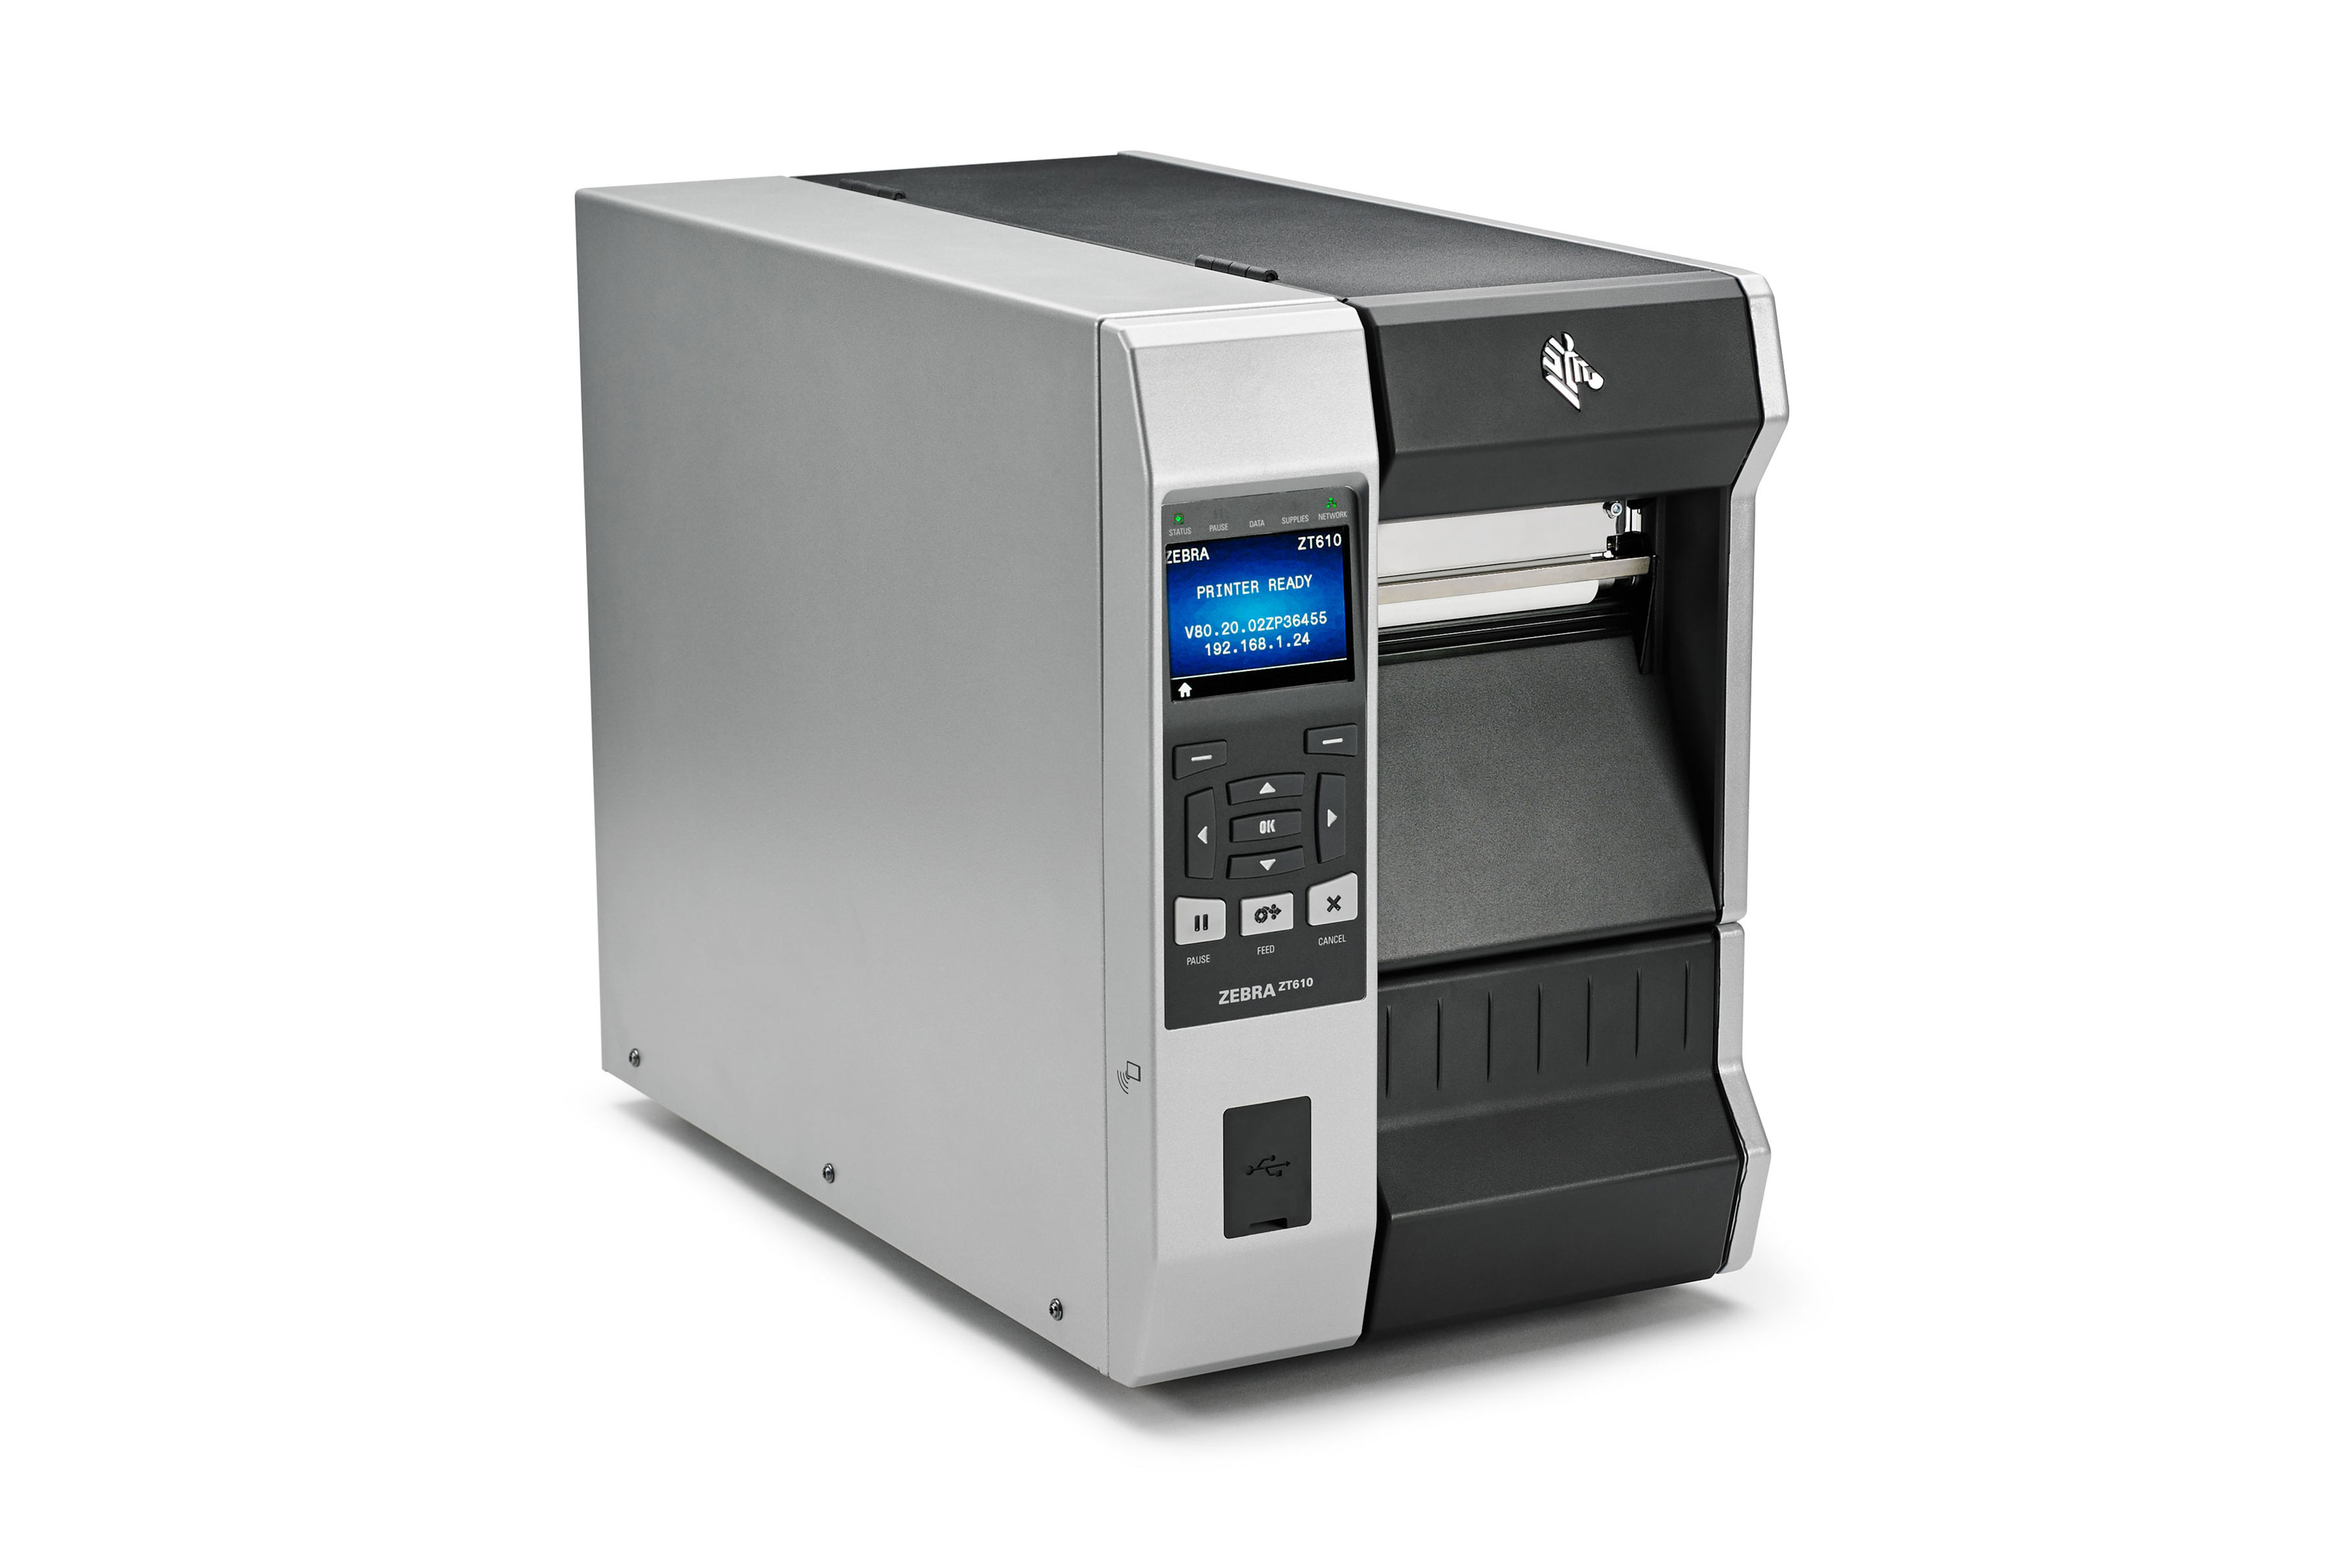 A Zebra card printer featuring a sleek and slim build with a built-in LCD screen display at the front